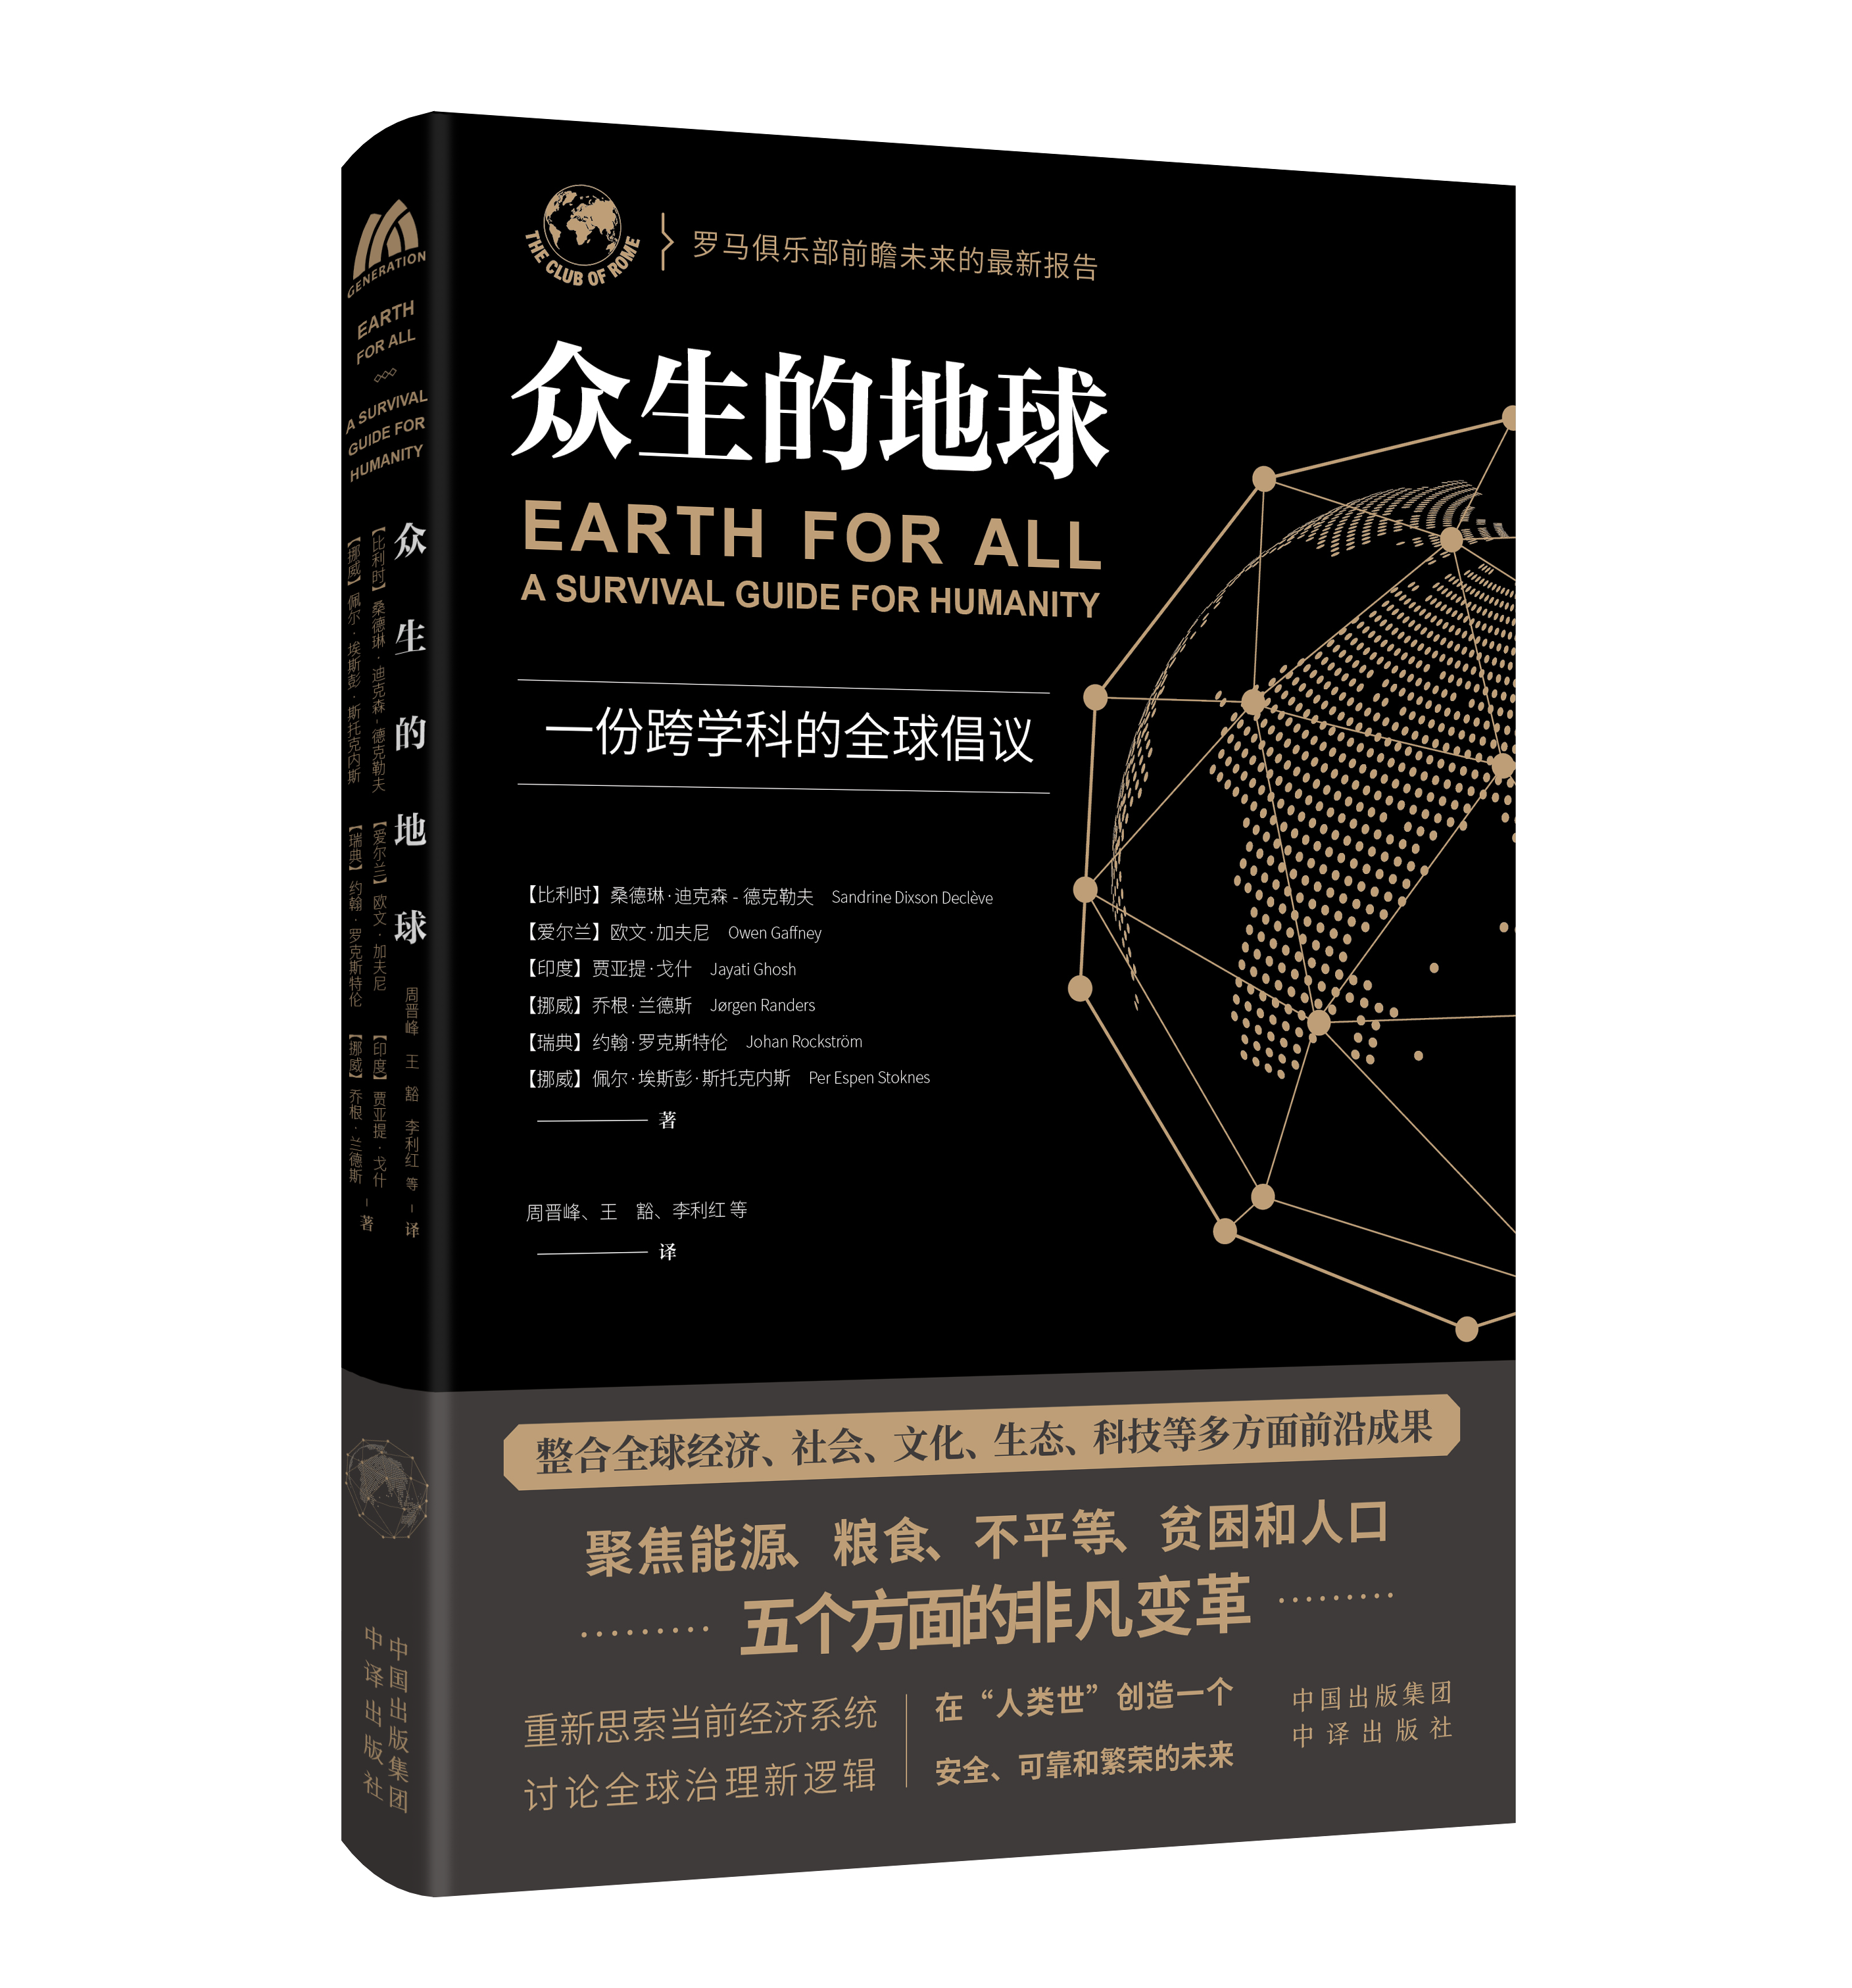 “Earth for All” now published in Chinese